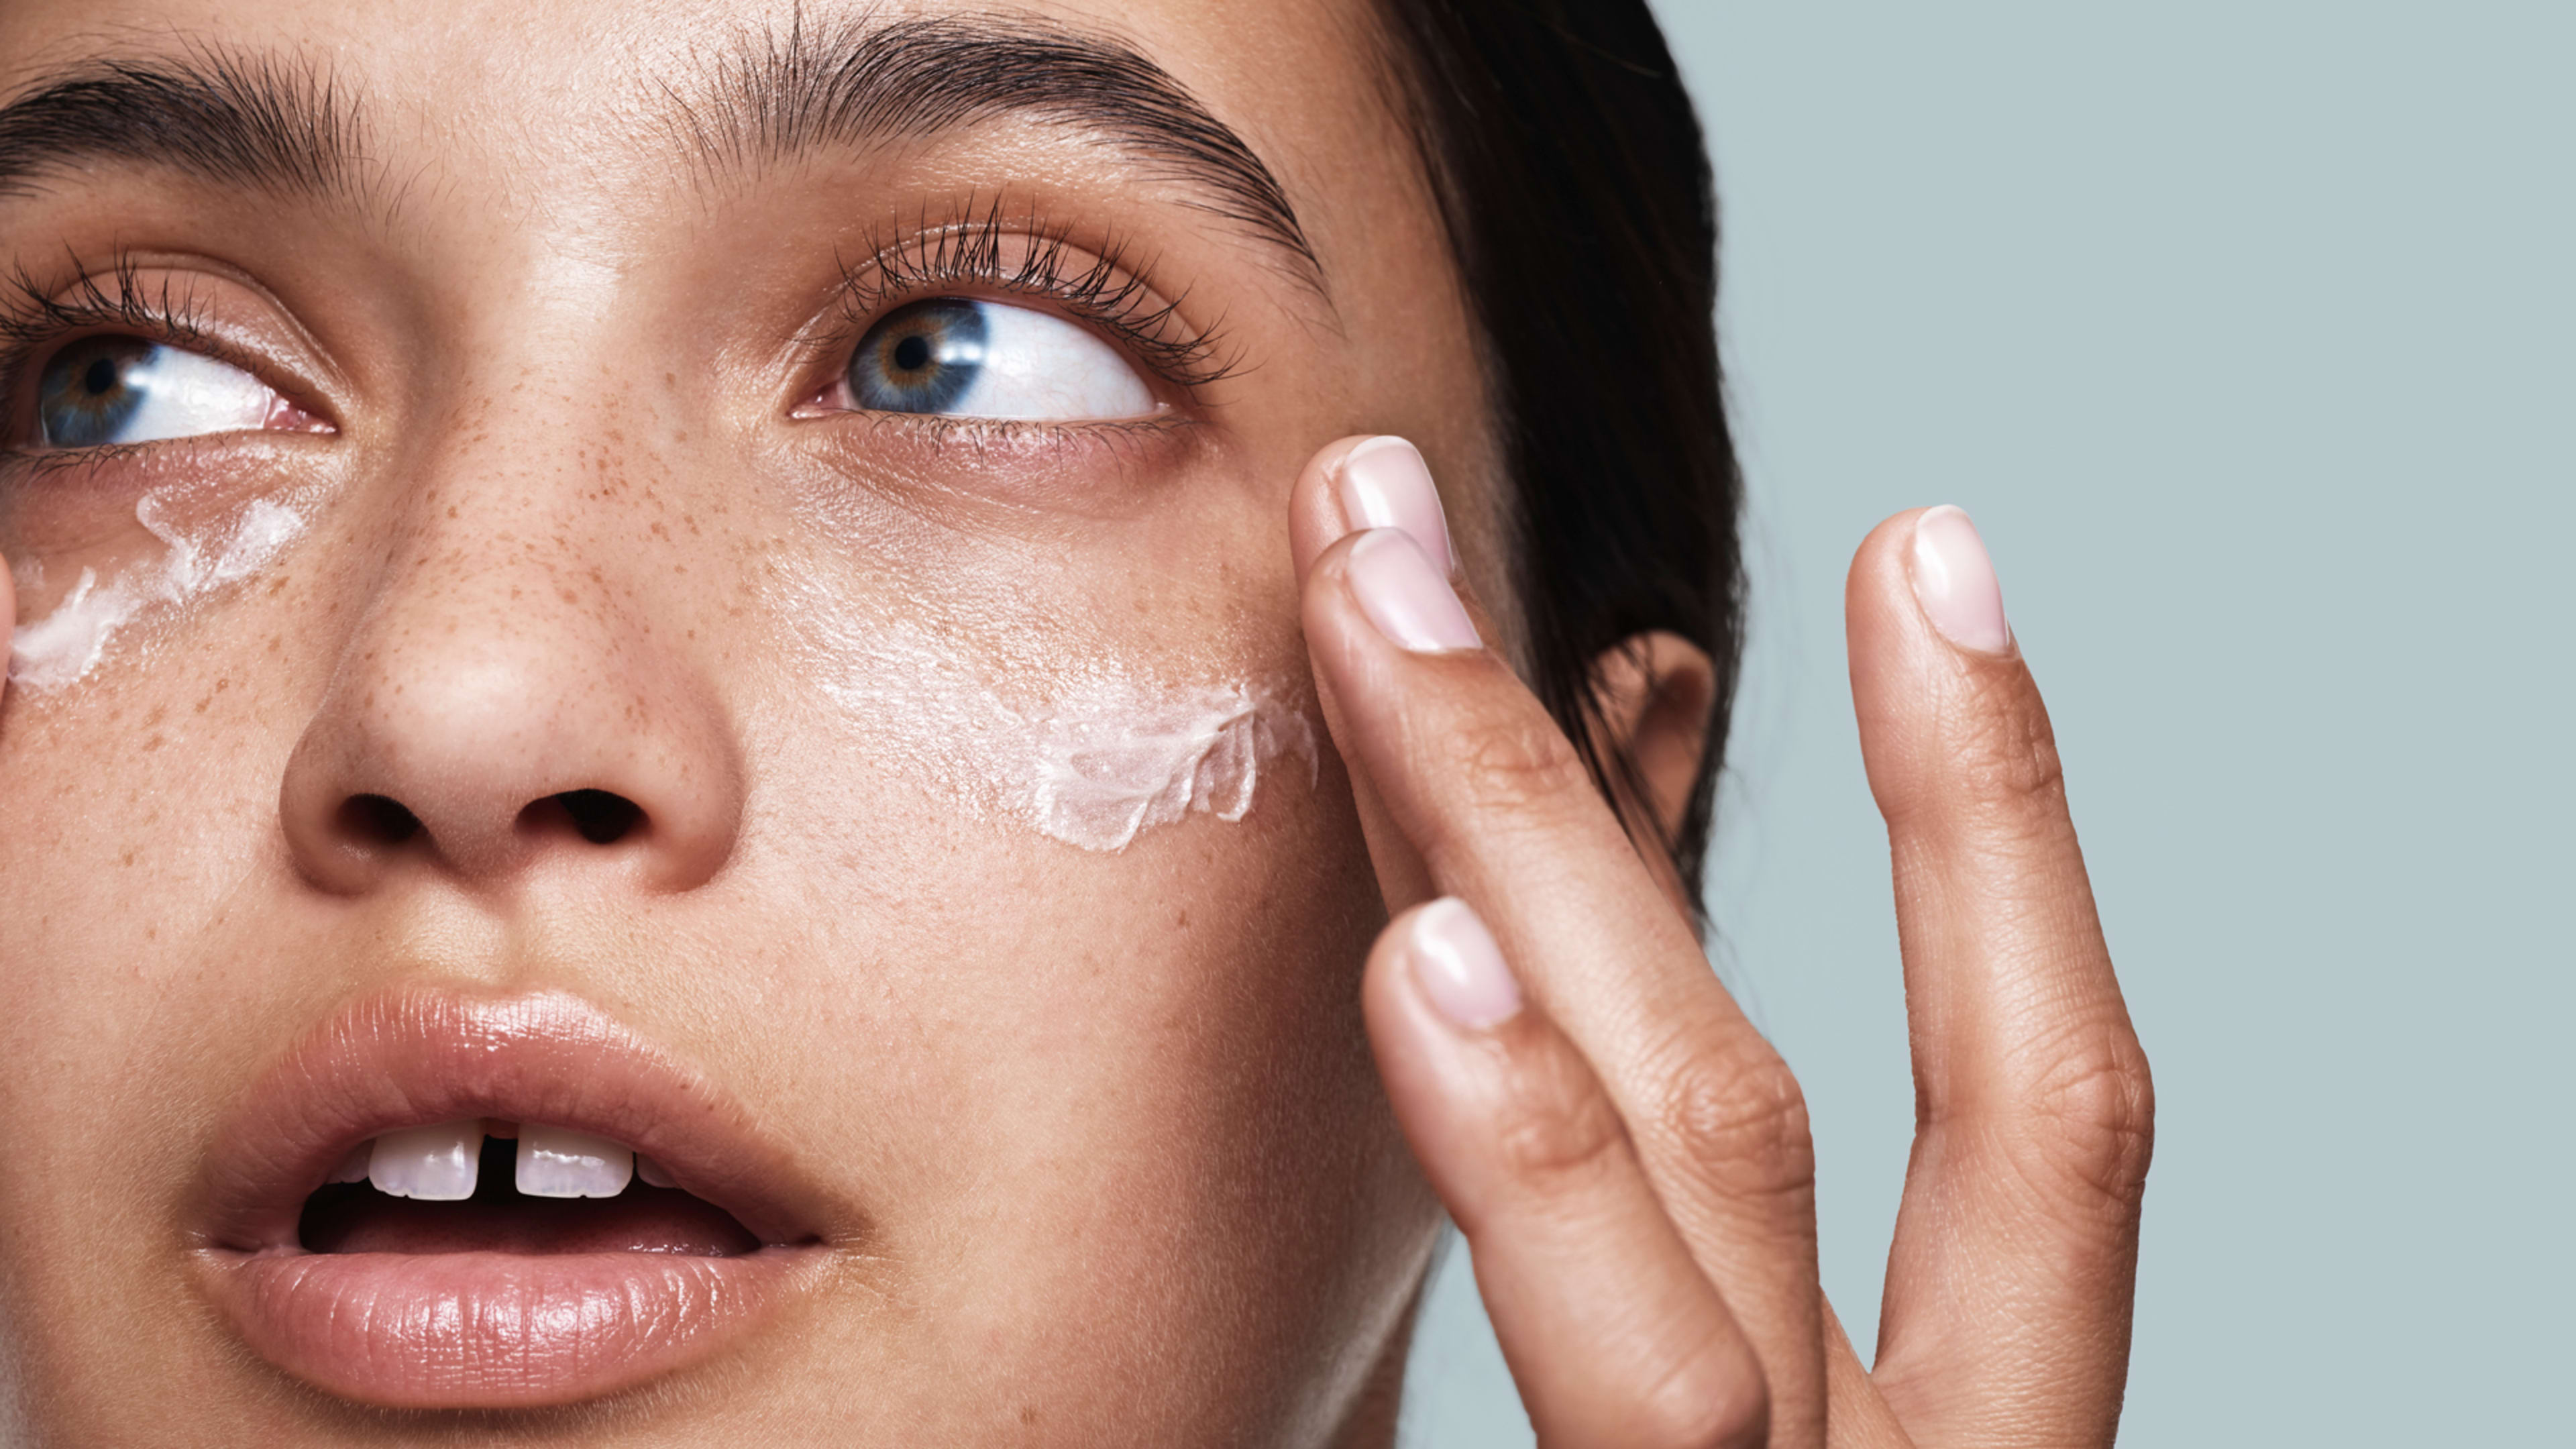 Target now carries a non-toxic skincare line built on the insights of 16 million women